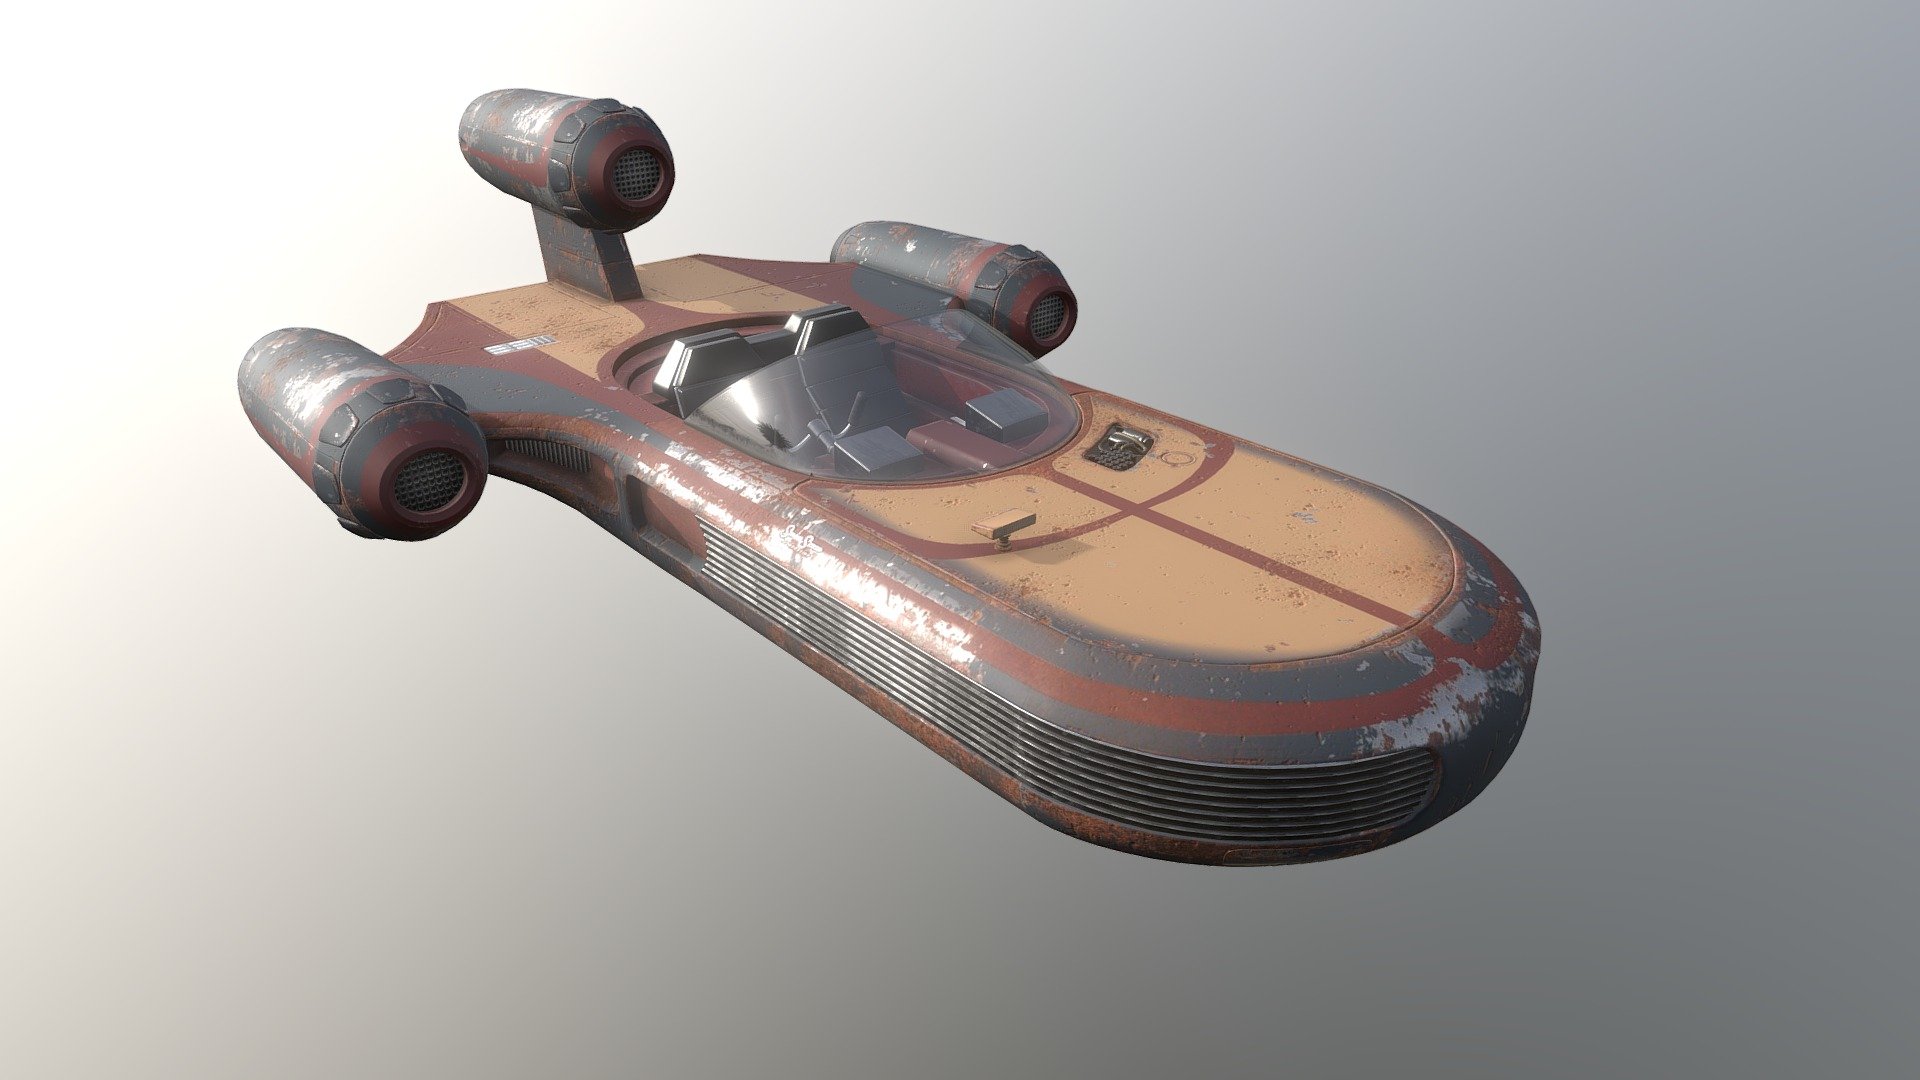 for my Ark mod :https://steamcommunity.com/sharedfiles/filedetails/?id=1275057217
I will be adding damage modes, upgrade parts and other paint jobs - Ark'd X-34 Landspeeder WIP - 3D model by lanthanum 3d model